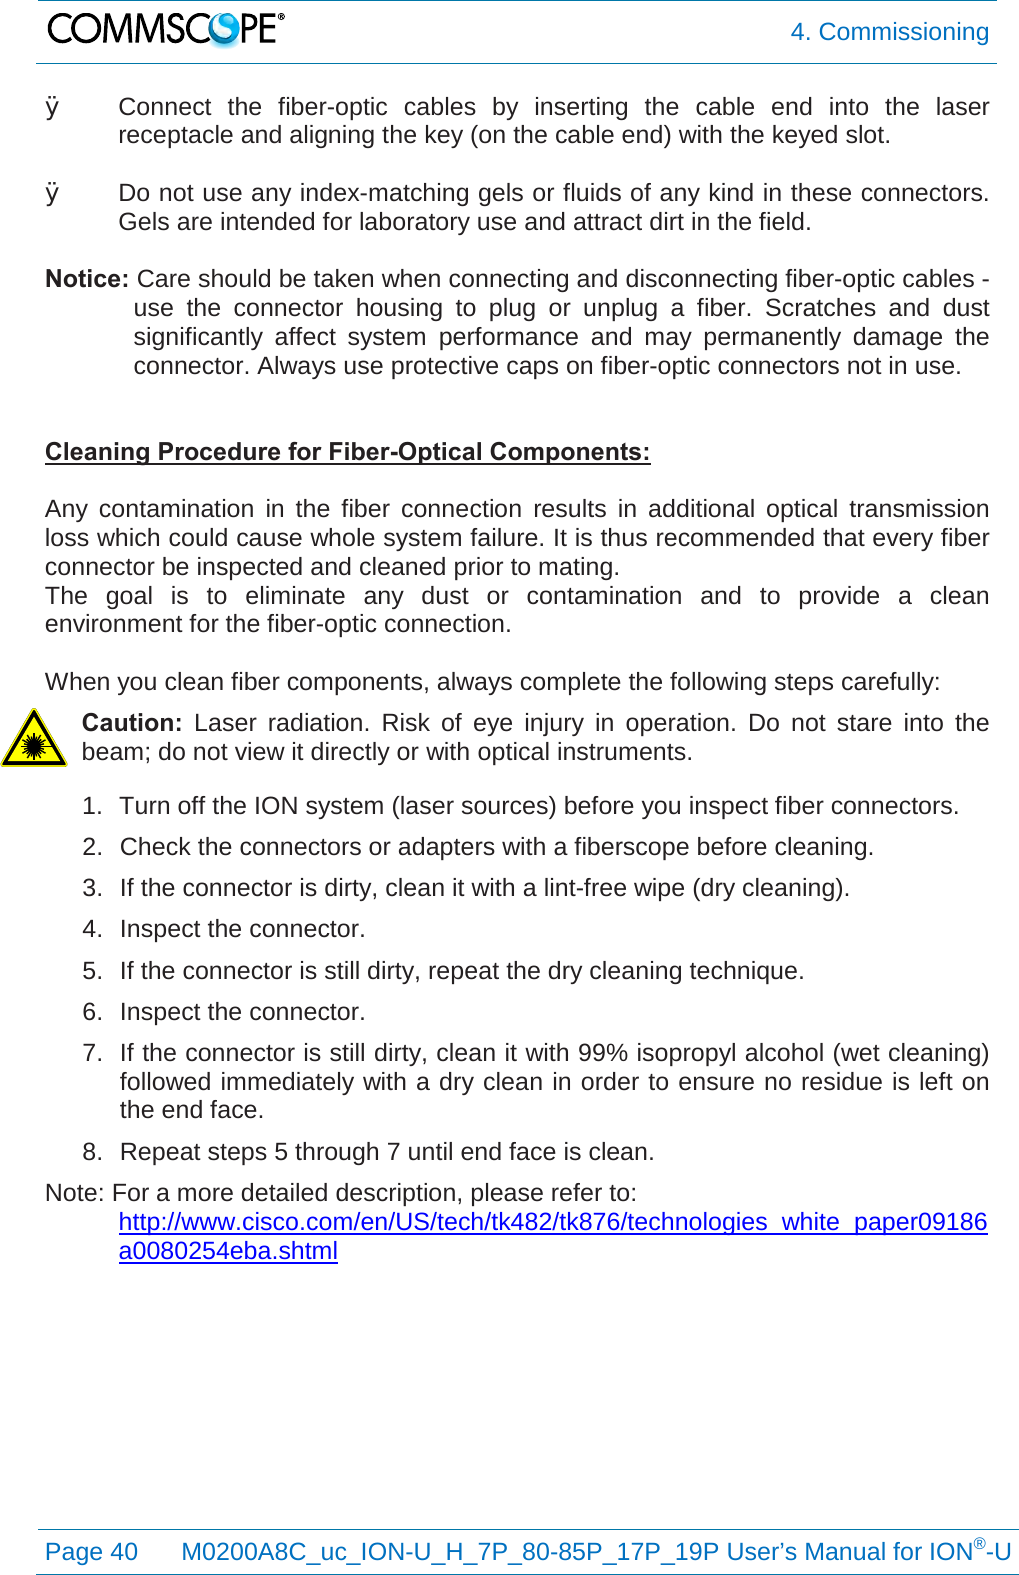  4. Commissioning  Page 40 M0200A8C_uc_ION-U_H_7P_80-85P_17P_19P User’s Manual for ION®-U  Ø Connect the fiber-optic cables by inserting the cable end into the laser receptacle and aligning the key (on the cable end) with the keyed slot.  Ø Do not use any index-matching gels or fluids of any kind in these connectors. Gels are intended for laboratory use and attract dirt in the field.  Notice: Care should be taken when connecting and disconnecting fiber-optic cables - use the connector housing to plug or unplug a fiber. Scratches and dust significantly affect system performance and may permanently damage the connector. Always use protective caps on fiber-optic connectors not in use.   Cleaning Procedure for Fiber-Optical Components:  Any contamination in the fiber connection results in additional optical transmission loss which could cause whole system failure. It is thus recommended that every fiber connector be inspected and cleaned prior to mating. The goal is to eliminate any dust or contamination and to provide a clean environment for the fiber-optic connection.   When you clean fiber components, always complete the following steps carefully: Caution:  Laser radiation. Risk of eye injury in operation. Do not stare into the beam; do not view it directly or with optical instruments. 1. Turn off the ION system (laser sources) before you inspect fiber connectors. 2. Check the connectors or adapters with a fiberscope before cleaning. 3. If the connector is dirty, clean it with a lint-free wipe (dry cleaning). 4. Inspect the connector. 5. If the connector is still dirty, repeat the dry cleaning technique. 6. Inspect the connector. 7. If the connector is still dirty, clean it with 99% isopropyl alcohol (wet cleaning) followed immediately with a dry clean in order to ensure no residue is left on the end face. 8. Repeat steps 5 through 7 until end face is clean. Note: For a more detailed description, please refer to:  http://www.cisco.com/en/US/tech/tk482/tk876/technologies_white_paper09186a0080254eba.shtml  